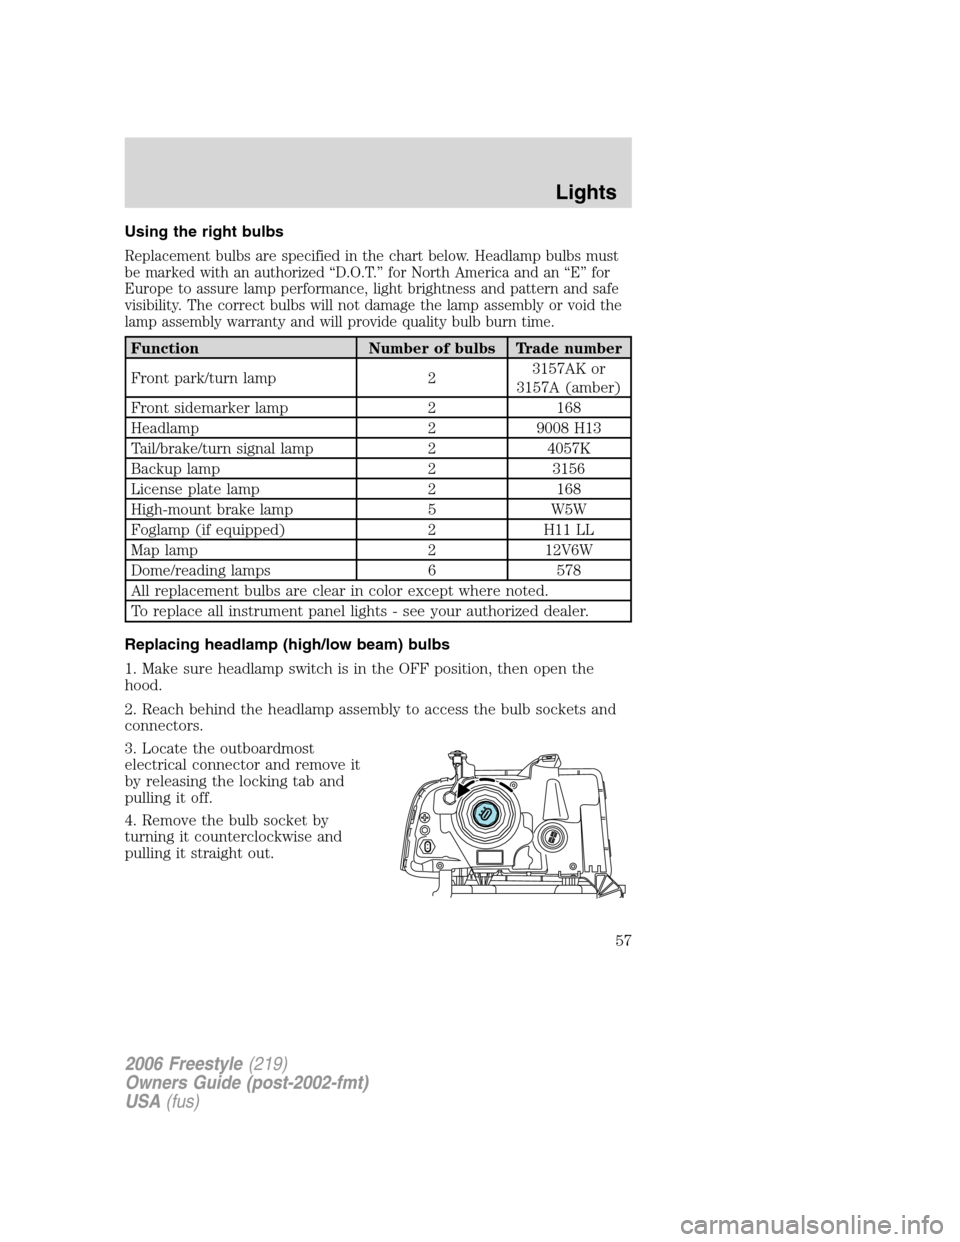 FORD FREESTYLE 2006 1.G Owners Manual Using the right bulbs
Replacement bulbs are specified in the chart below. Headlamp bulbs must
be marked with an authorized “D.O.T.” for North America and an “E” for
Europe to assure lamp perfo